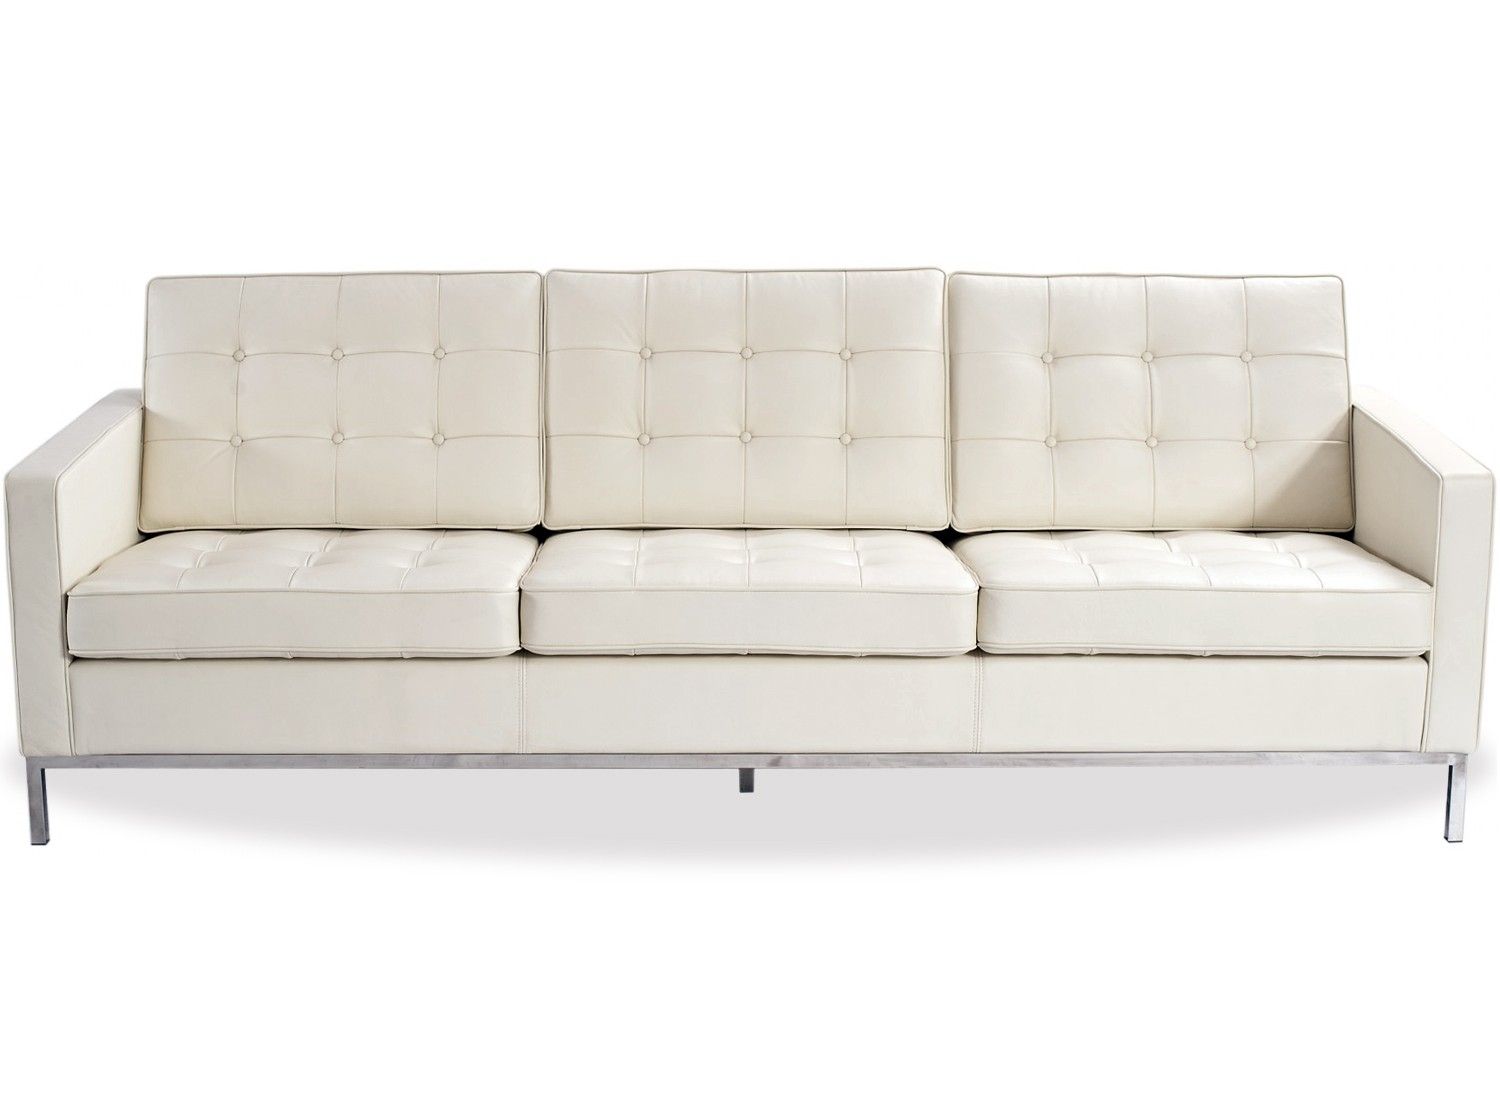 Florence Sofa Florence Knoll Style Sofa Florence Knoll Sofa Wool With Florence Knoll 3 Seater Sofas (View 10 of 15)